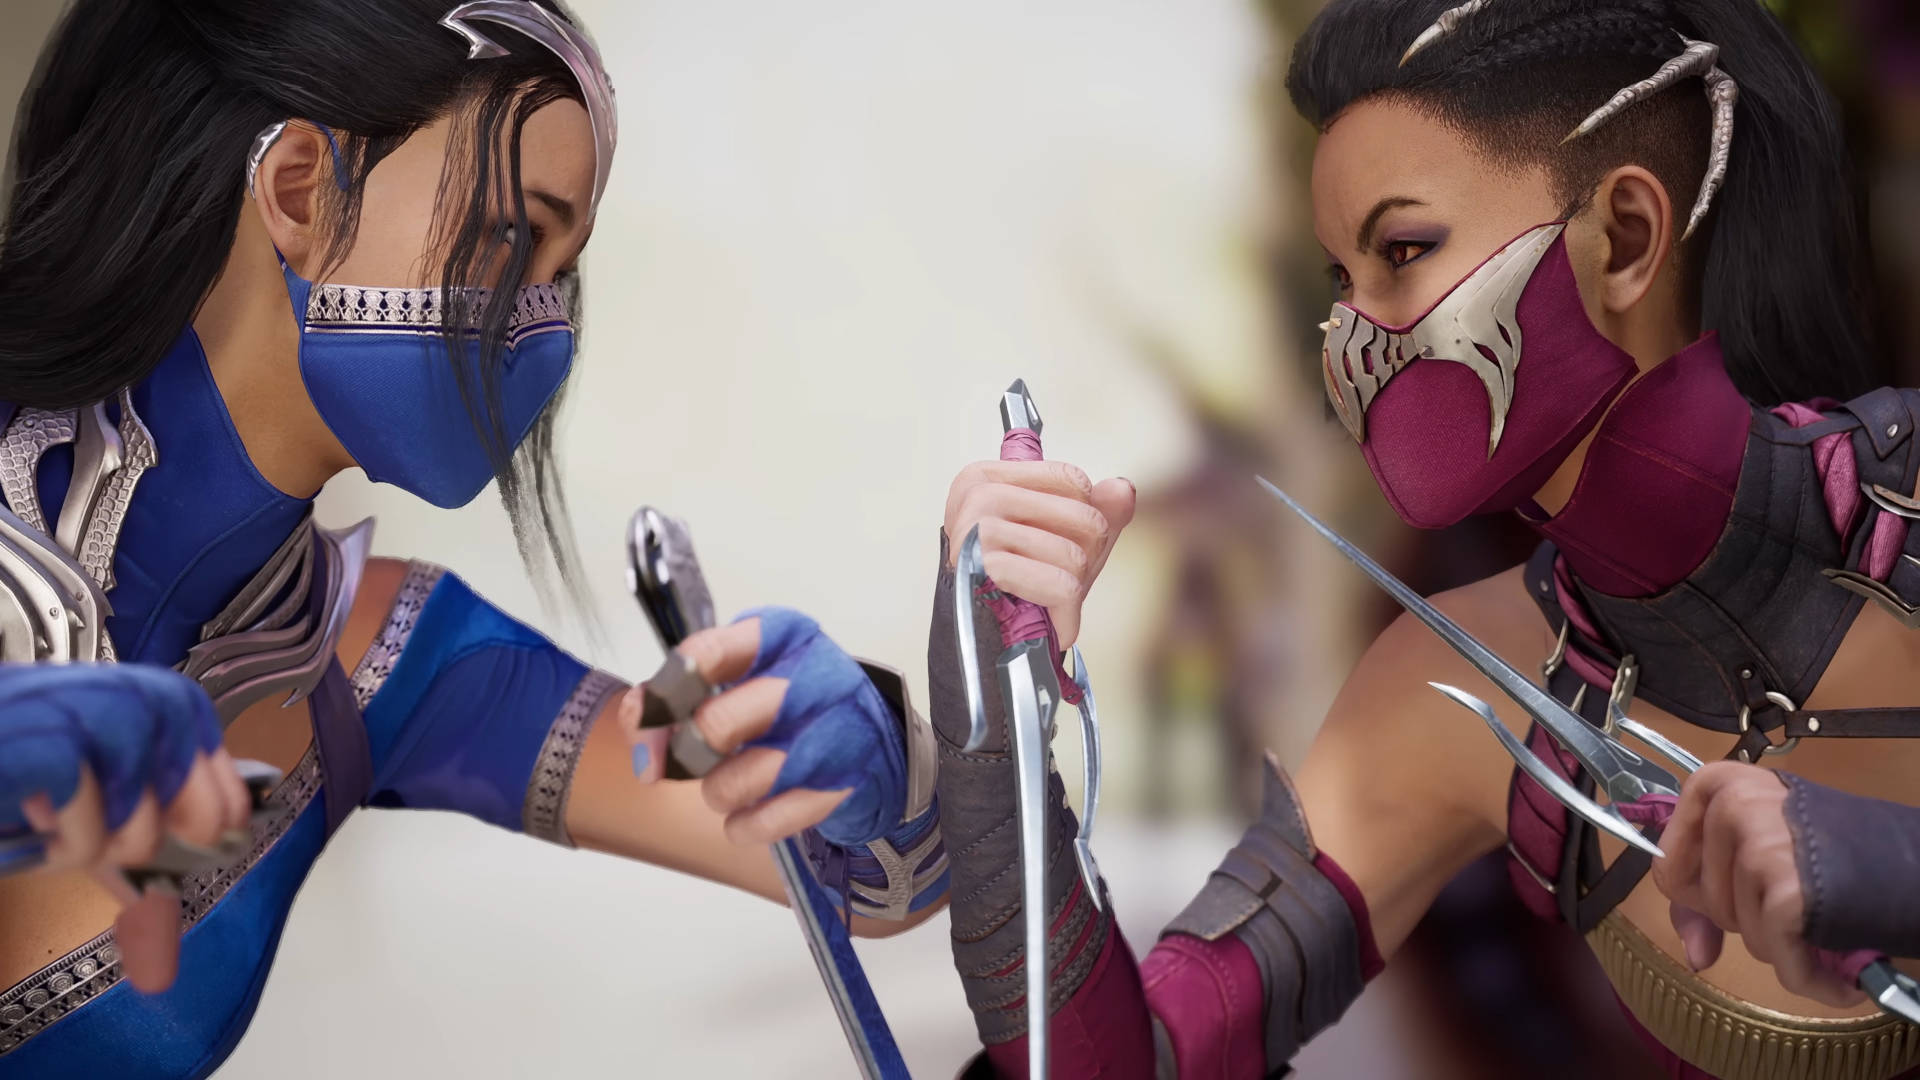 Kitana and Mileena are confirmed playable Mortal Kombat 1 characters, who are clashing before the fight starts.